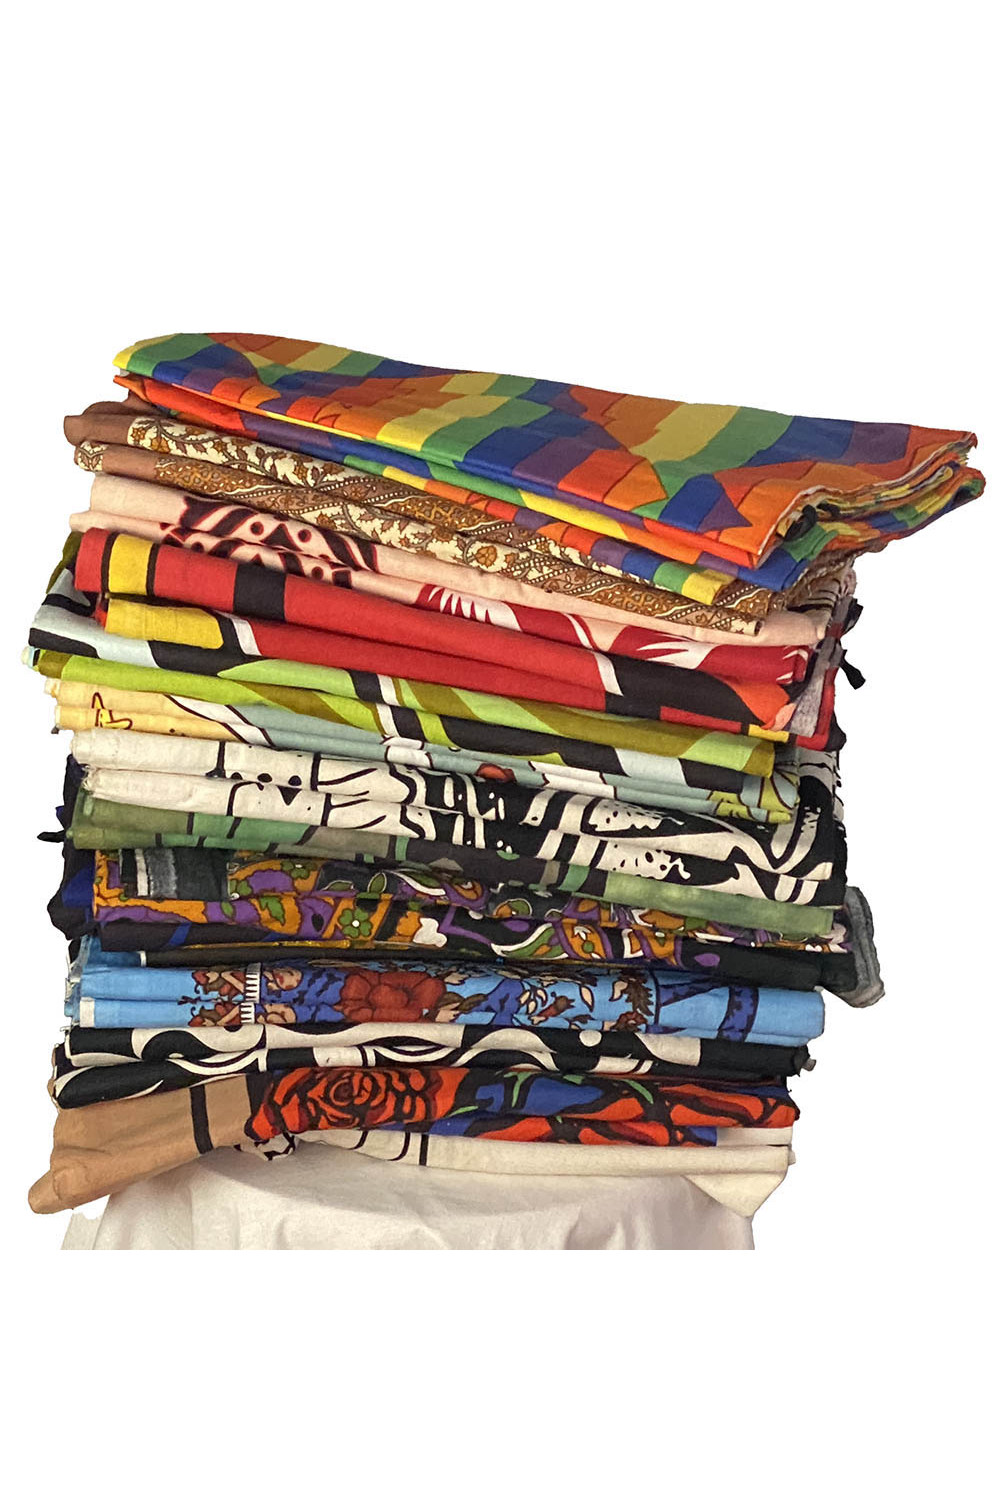 WHOLESALE LOT of 30 Assorted Crafter Quality Tapestries (Contains Print and Fabric Imperfections) -